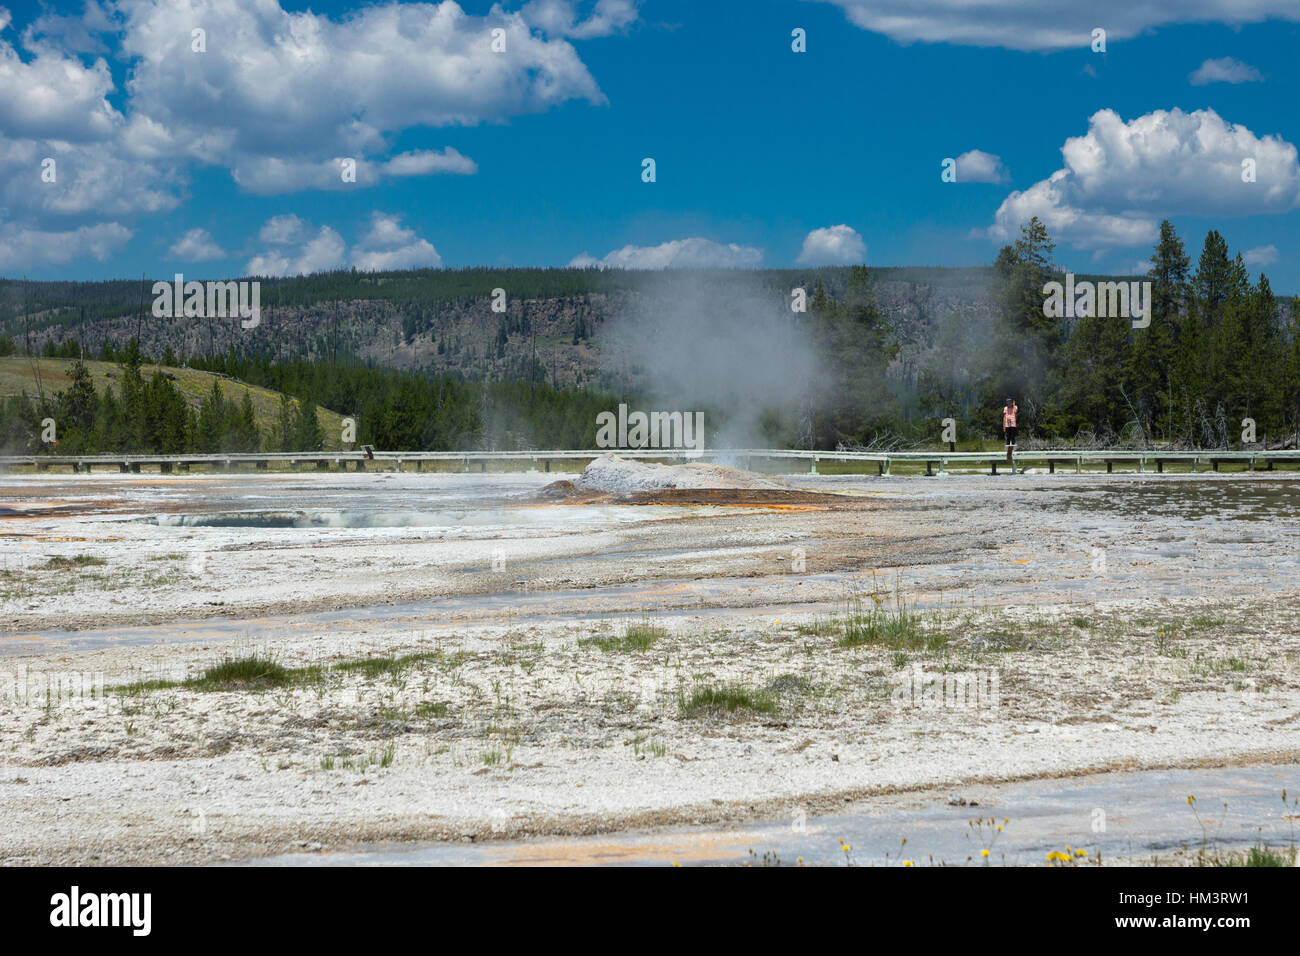 Daisy Geyser, Upper Geyser Basin, Parc National de Yellowstone, Wyoming, USA Banque D'Images